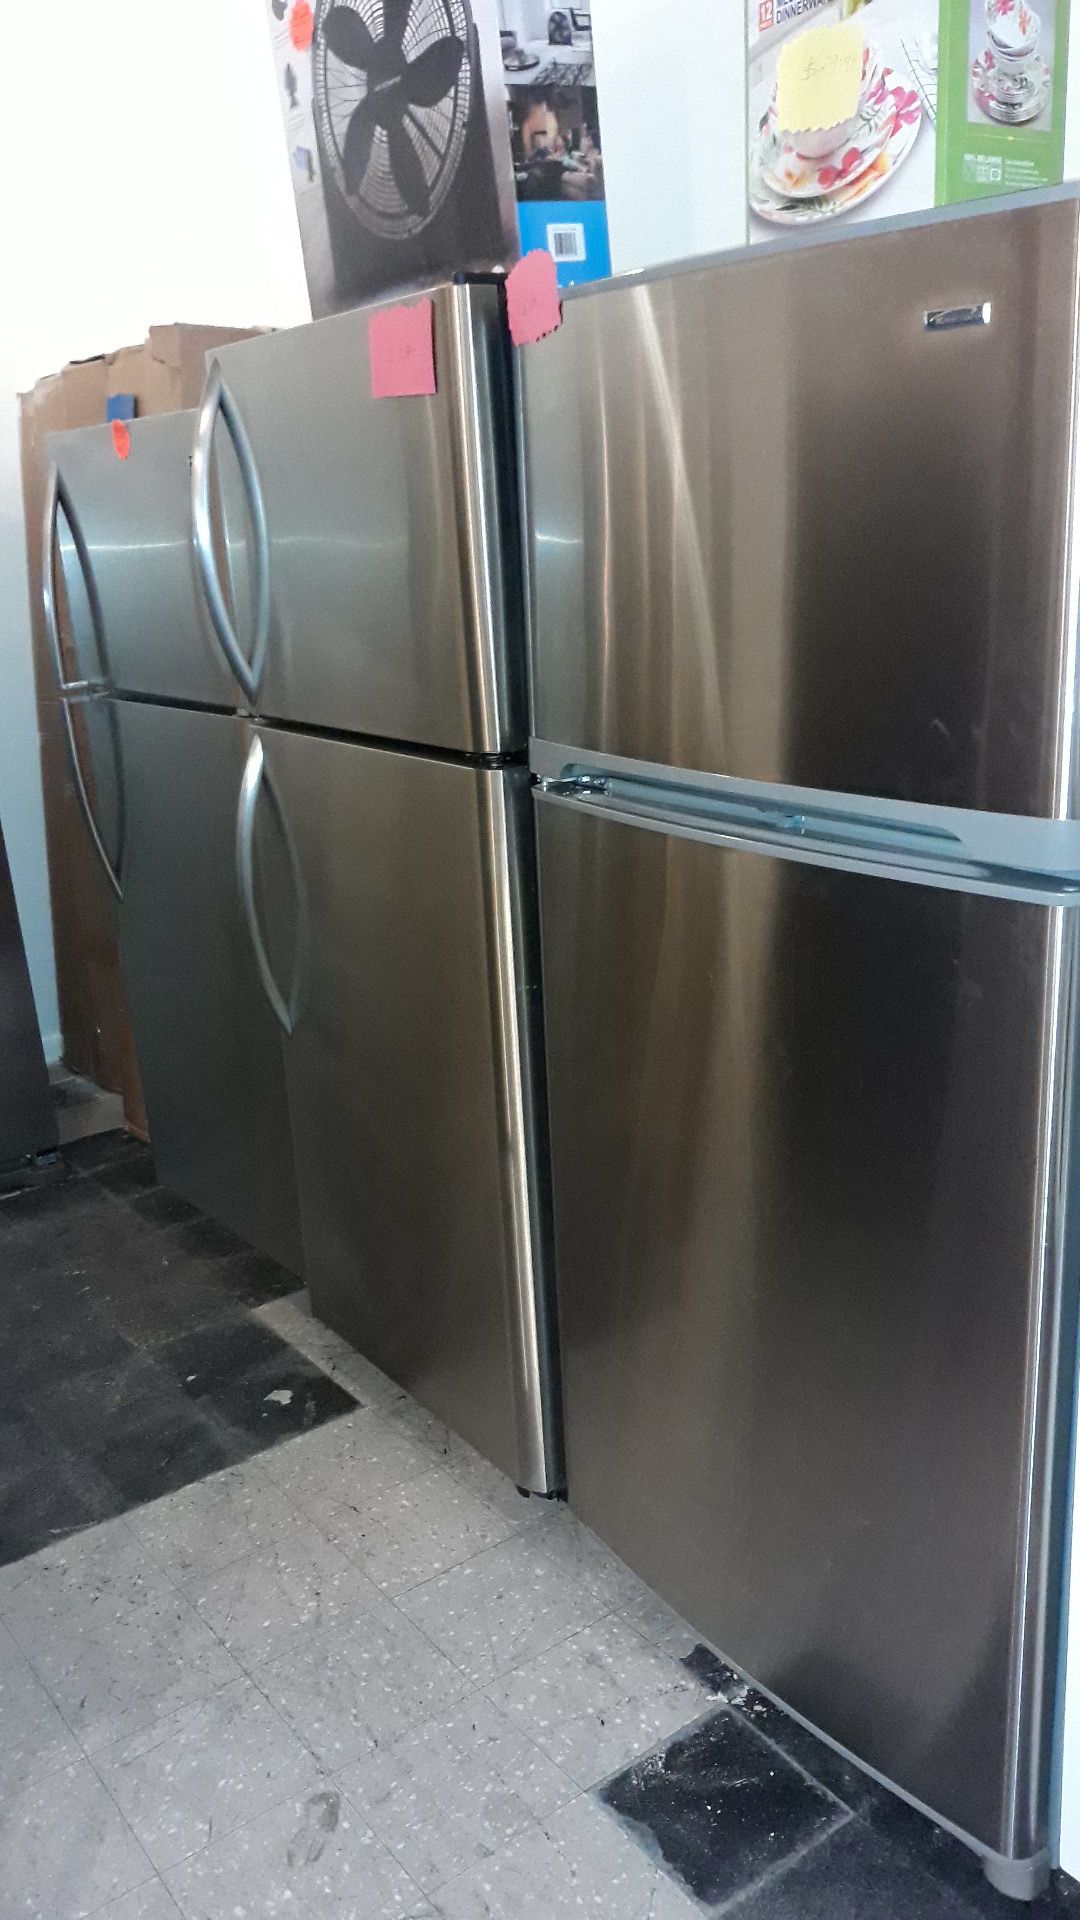 Stainless steel top and bottom refrigerator excellent condition 4months warranty ice maker